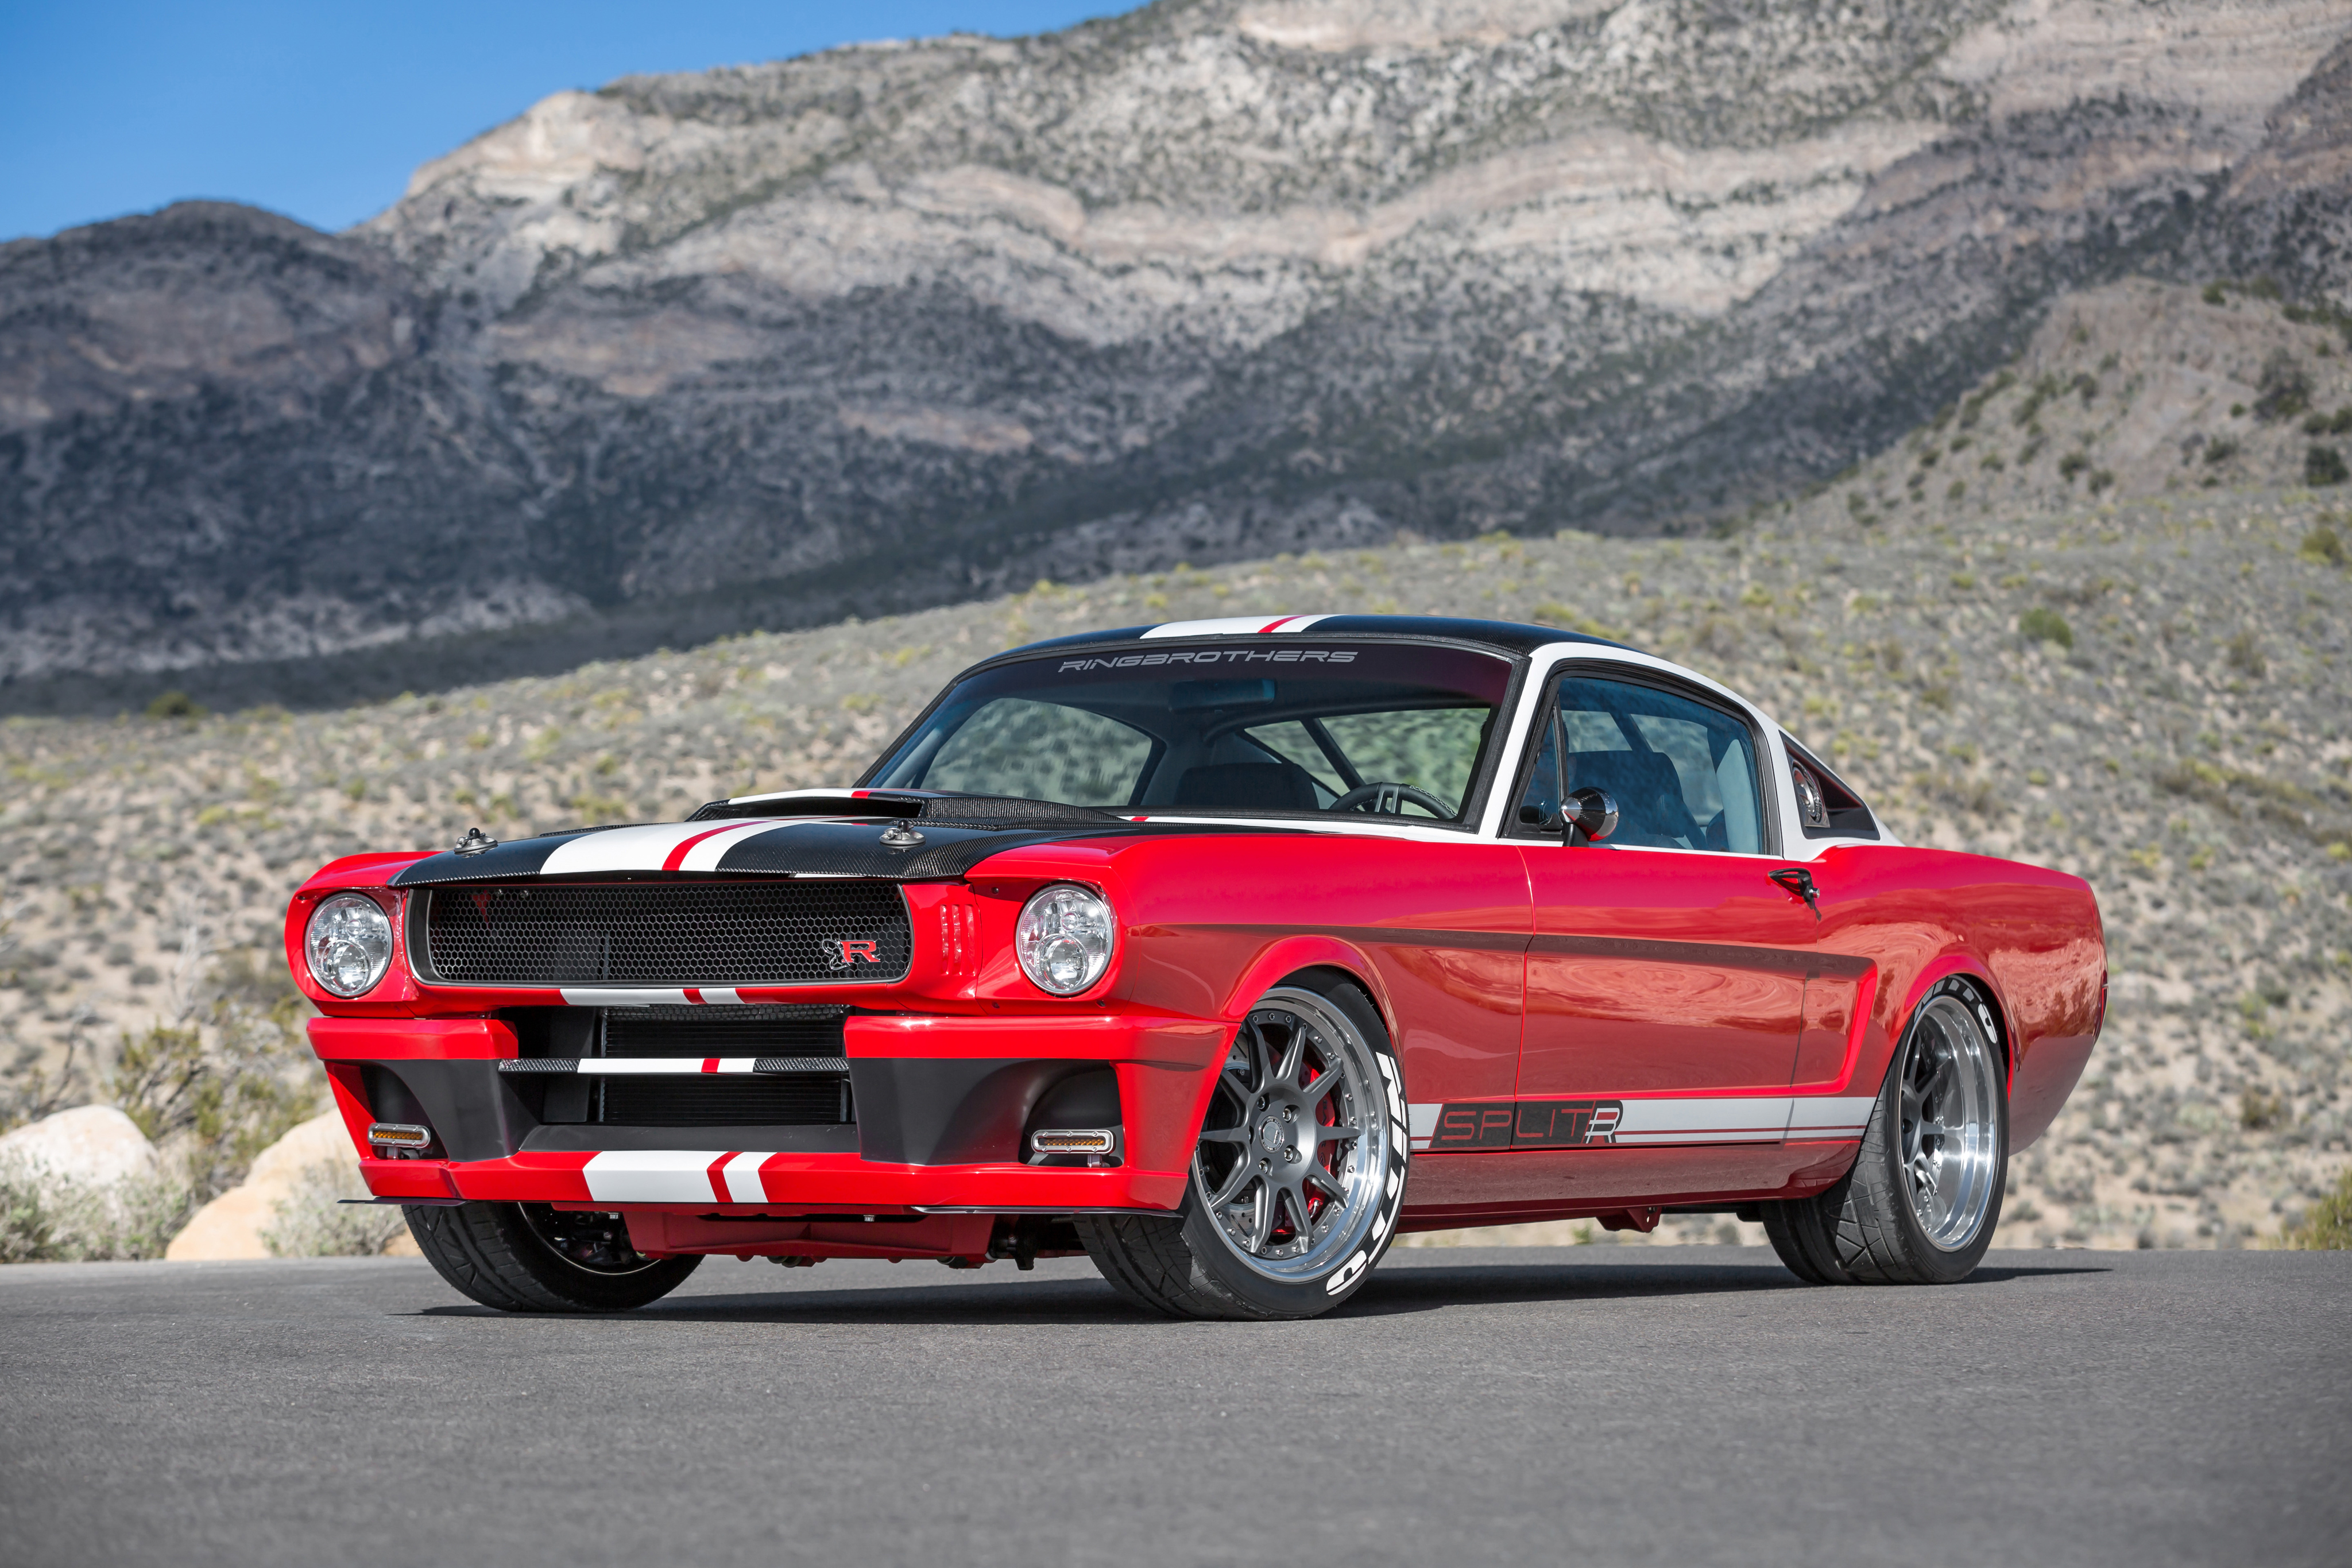 Car Ford Ford Mustang Muscle Car Red Car Ringbrothers Tuning Vehicle 4096x2731